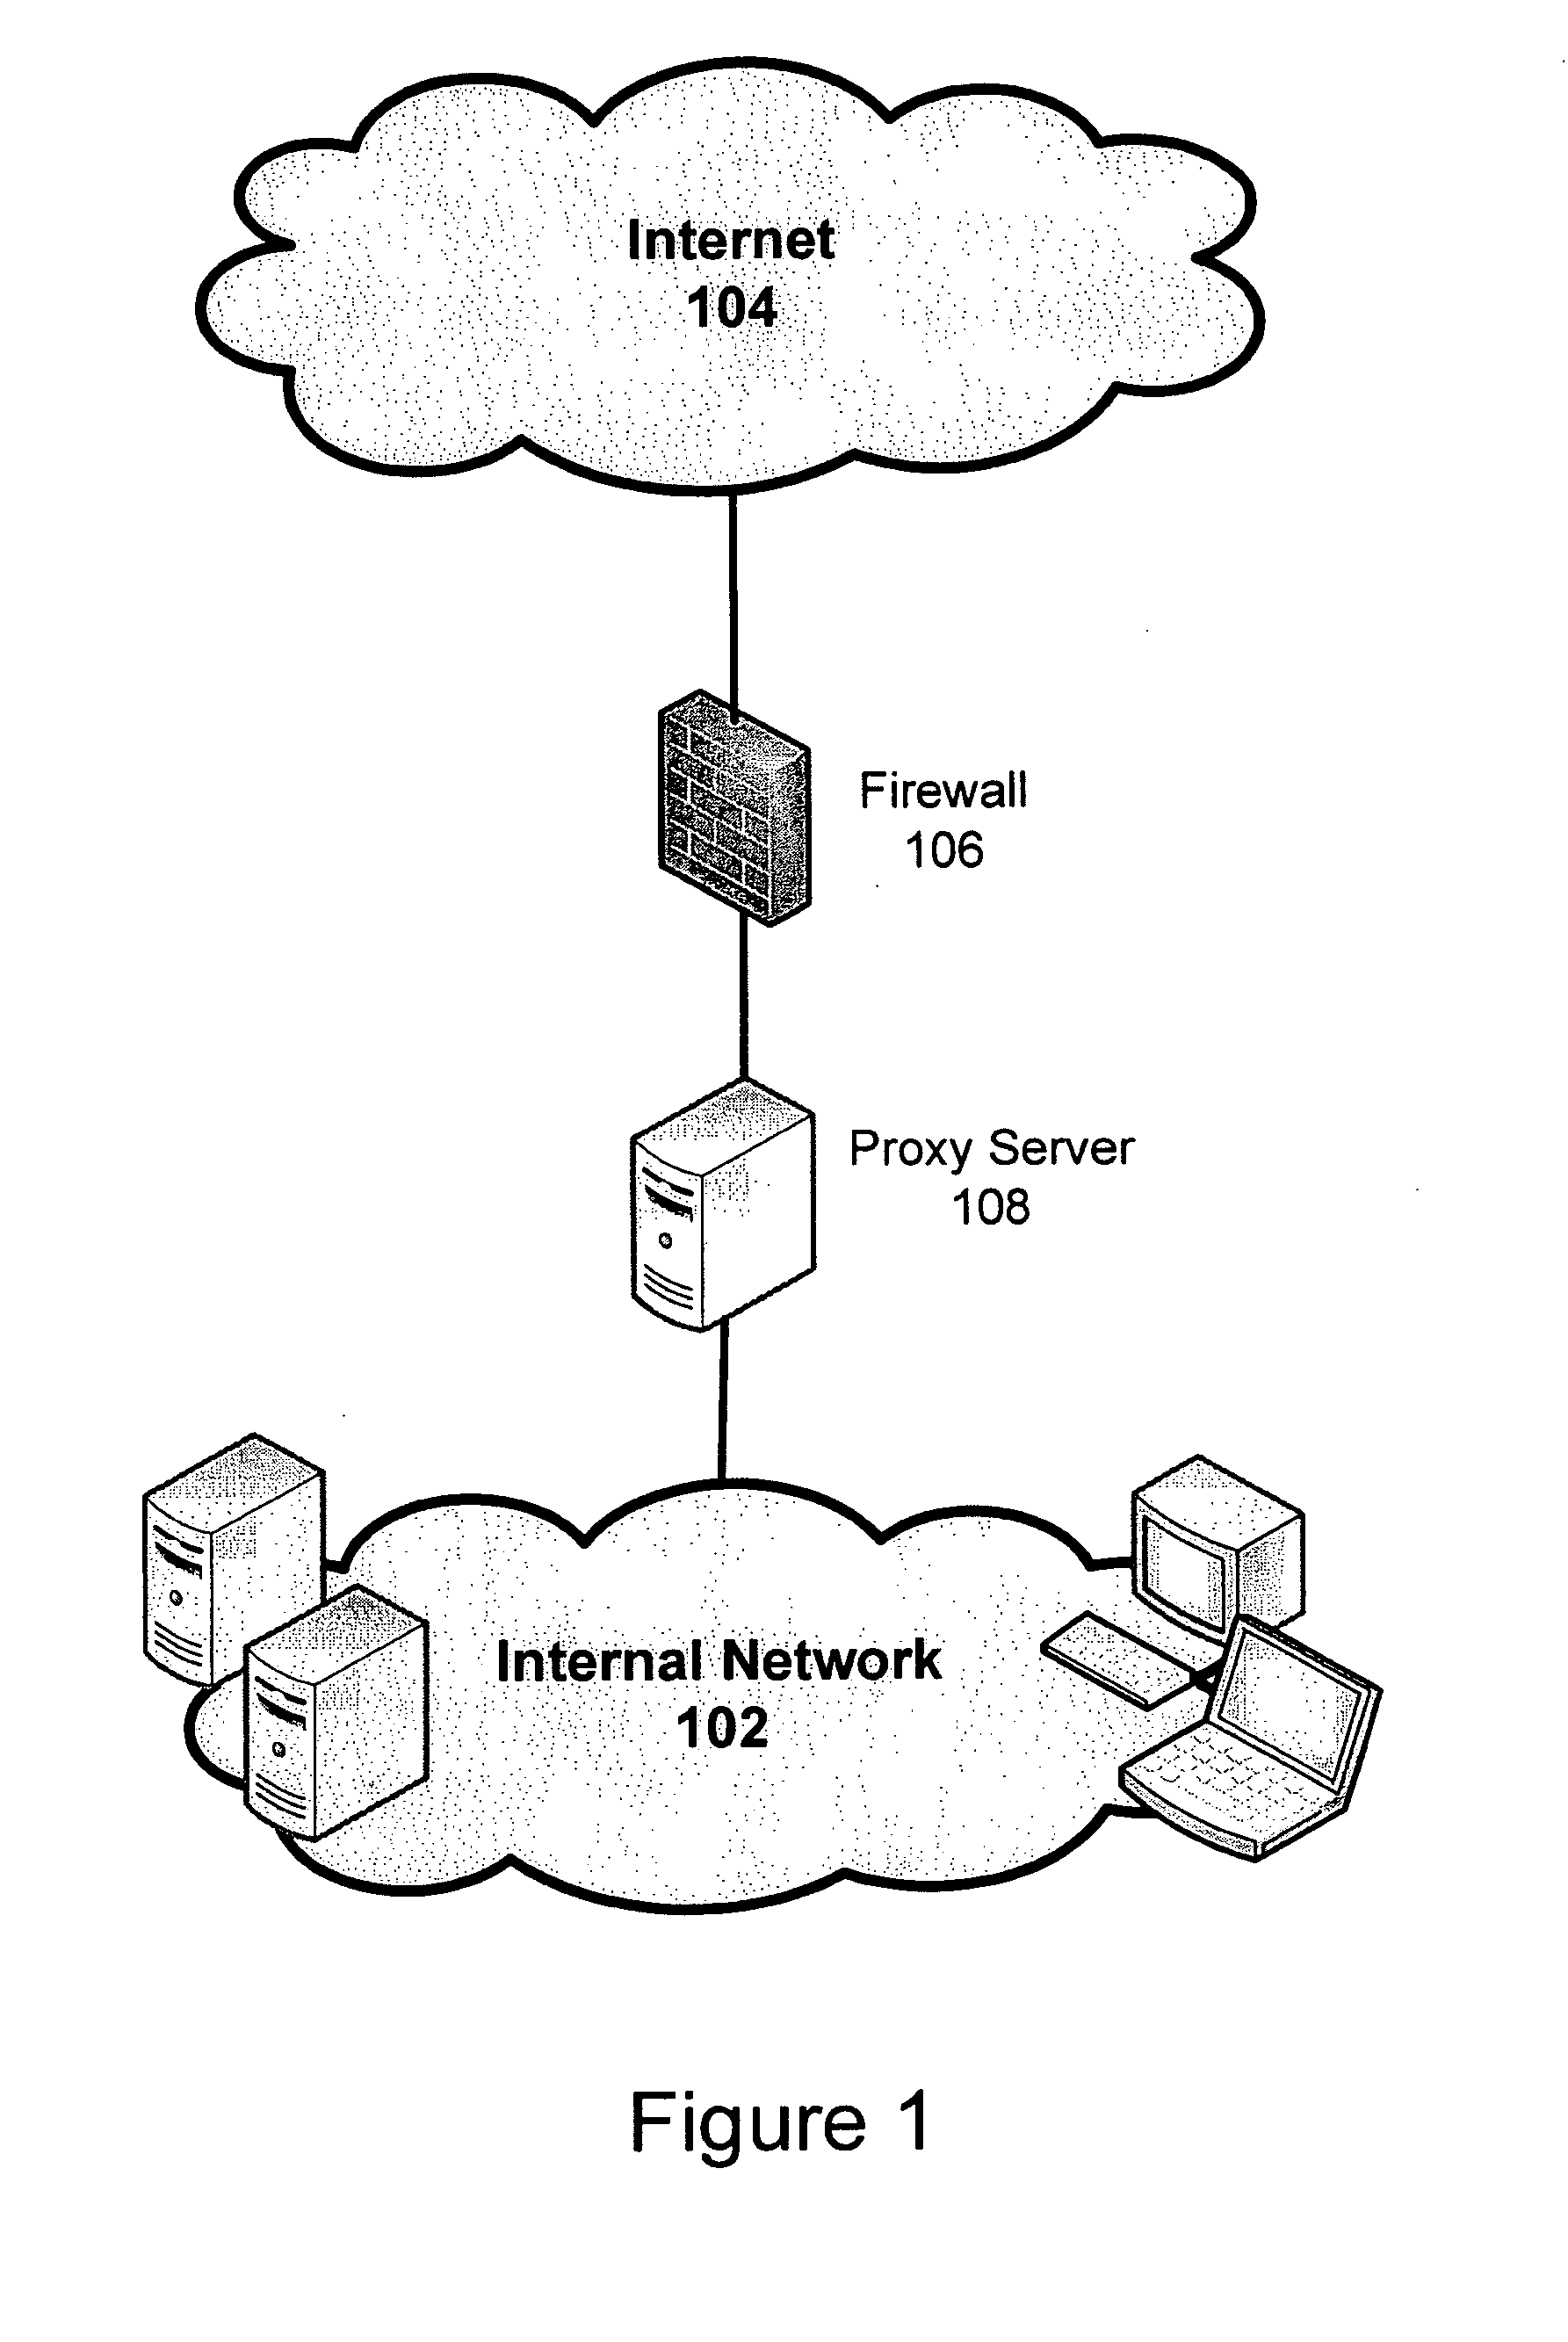 Methods and apparatus for blocking unwanted software downloads